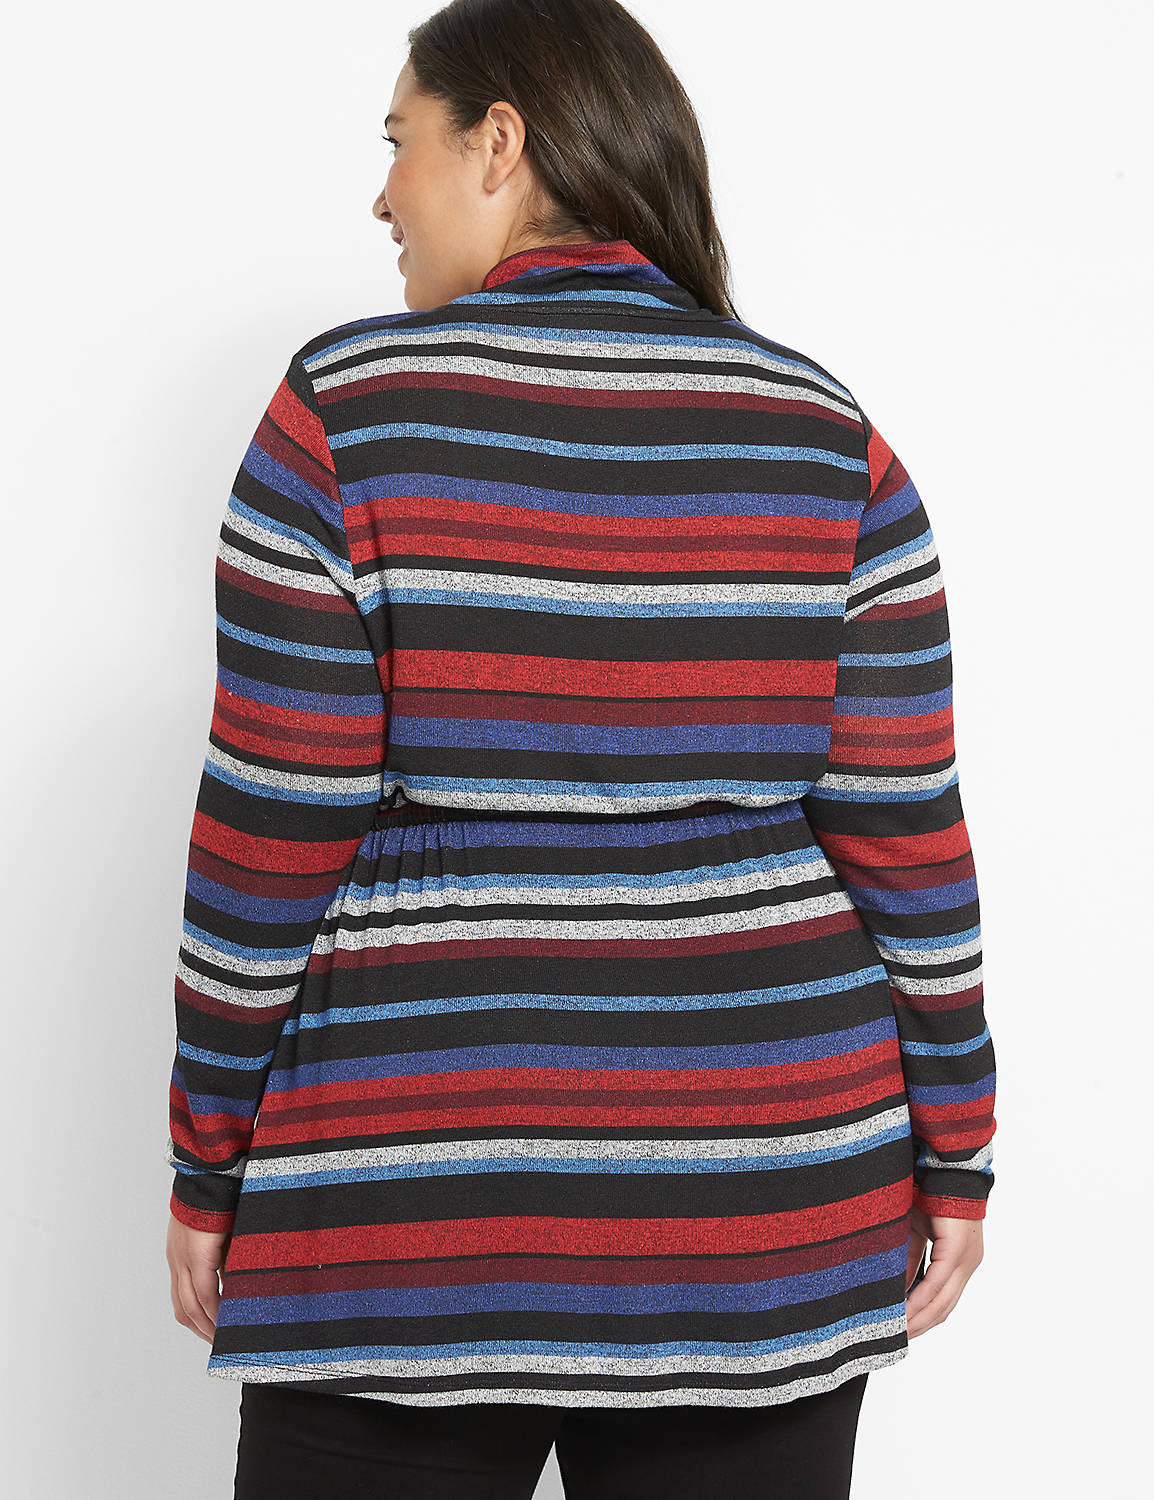 Long Sleeve Funnel Neck Drawcord Tunic In Printed Hacci 1123739:LBH21099_KaylieStripe_V2_CW5:14/16 Product Image 2